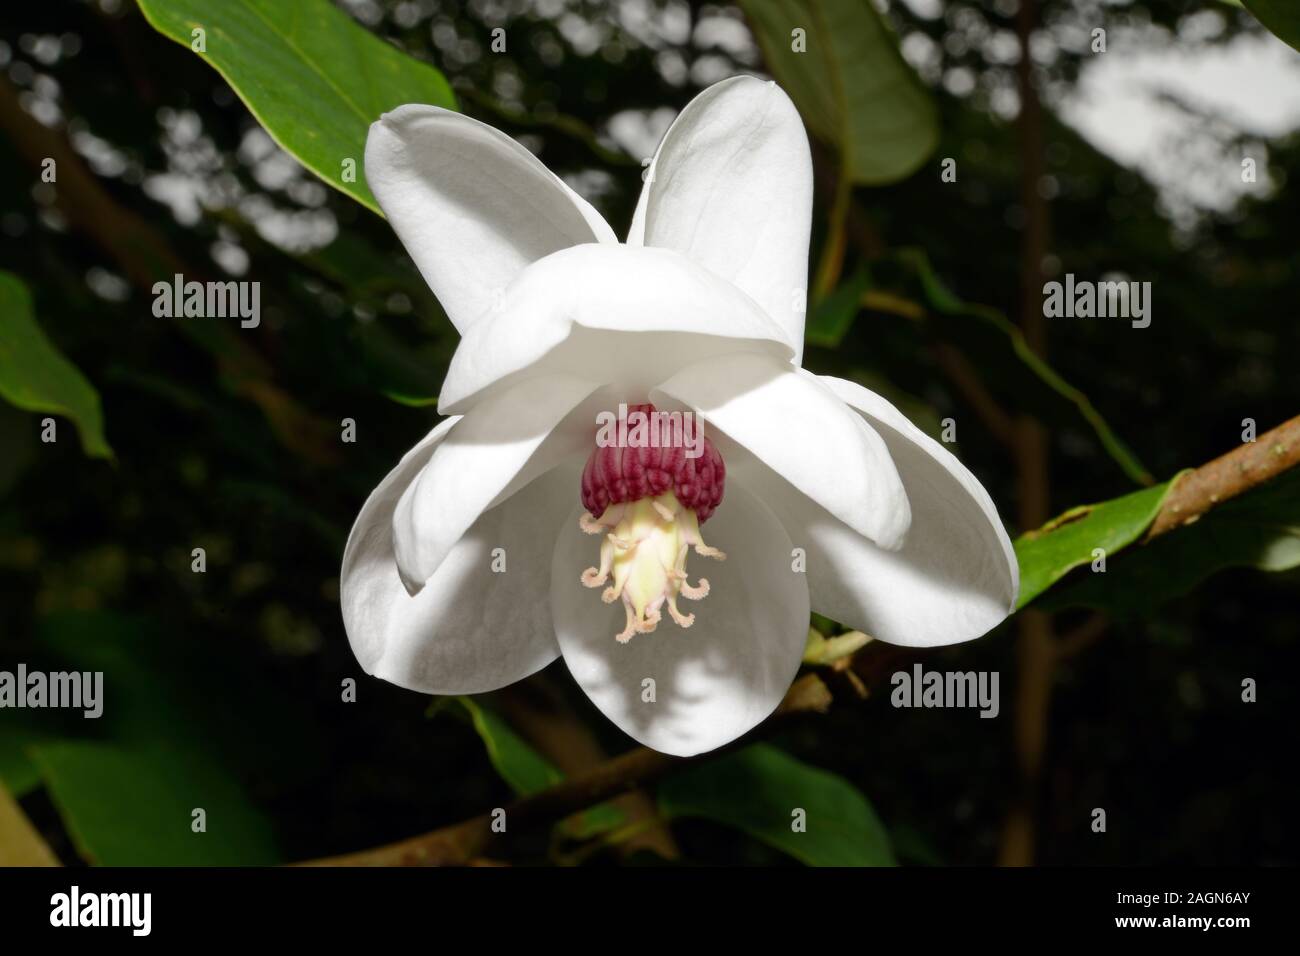 Magnolia sieboldii (Siebold's magnolia) is native to east Asia including China, Japan and Korea growing in subtropical / tropical montane forest. Stock Photo